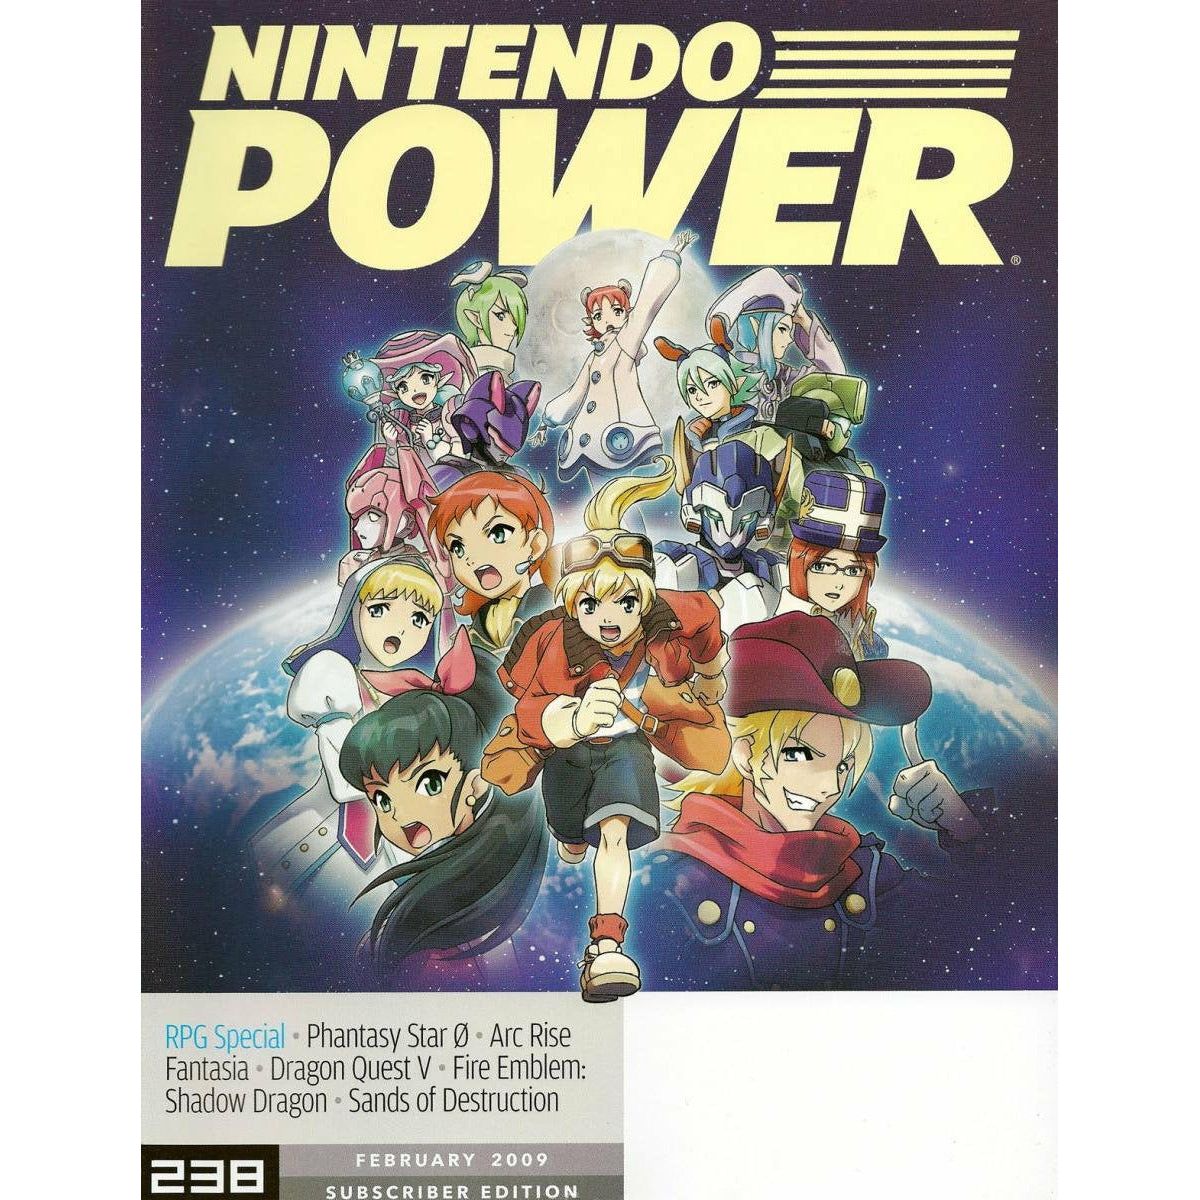 Nintendo Power Magazine (#238 Subscriber Edition) - Complete and/or Good Condition